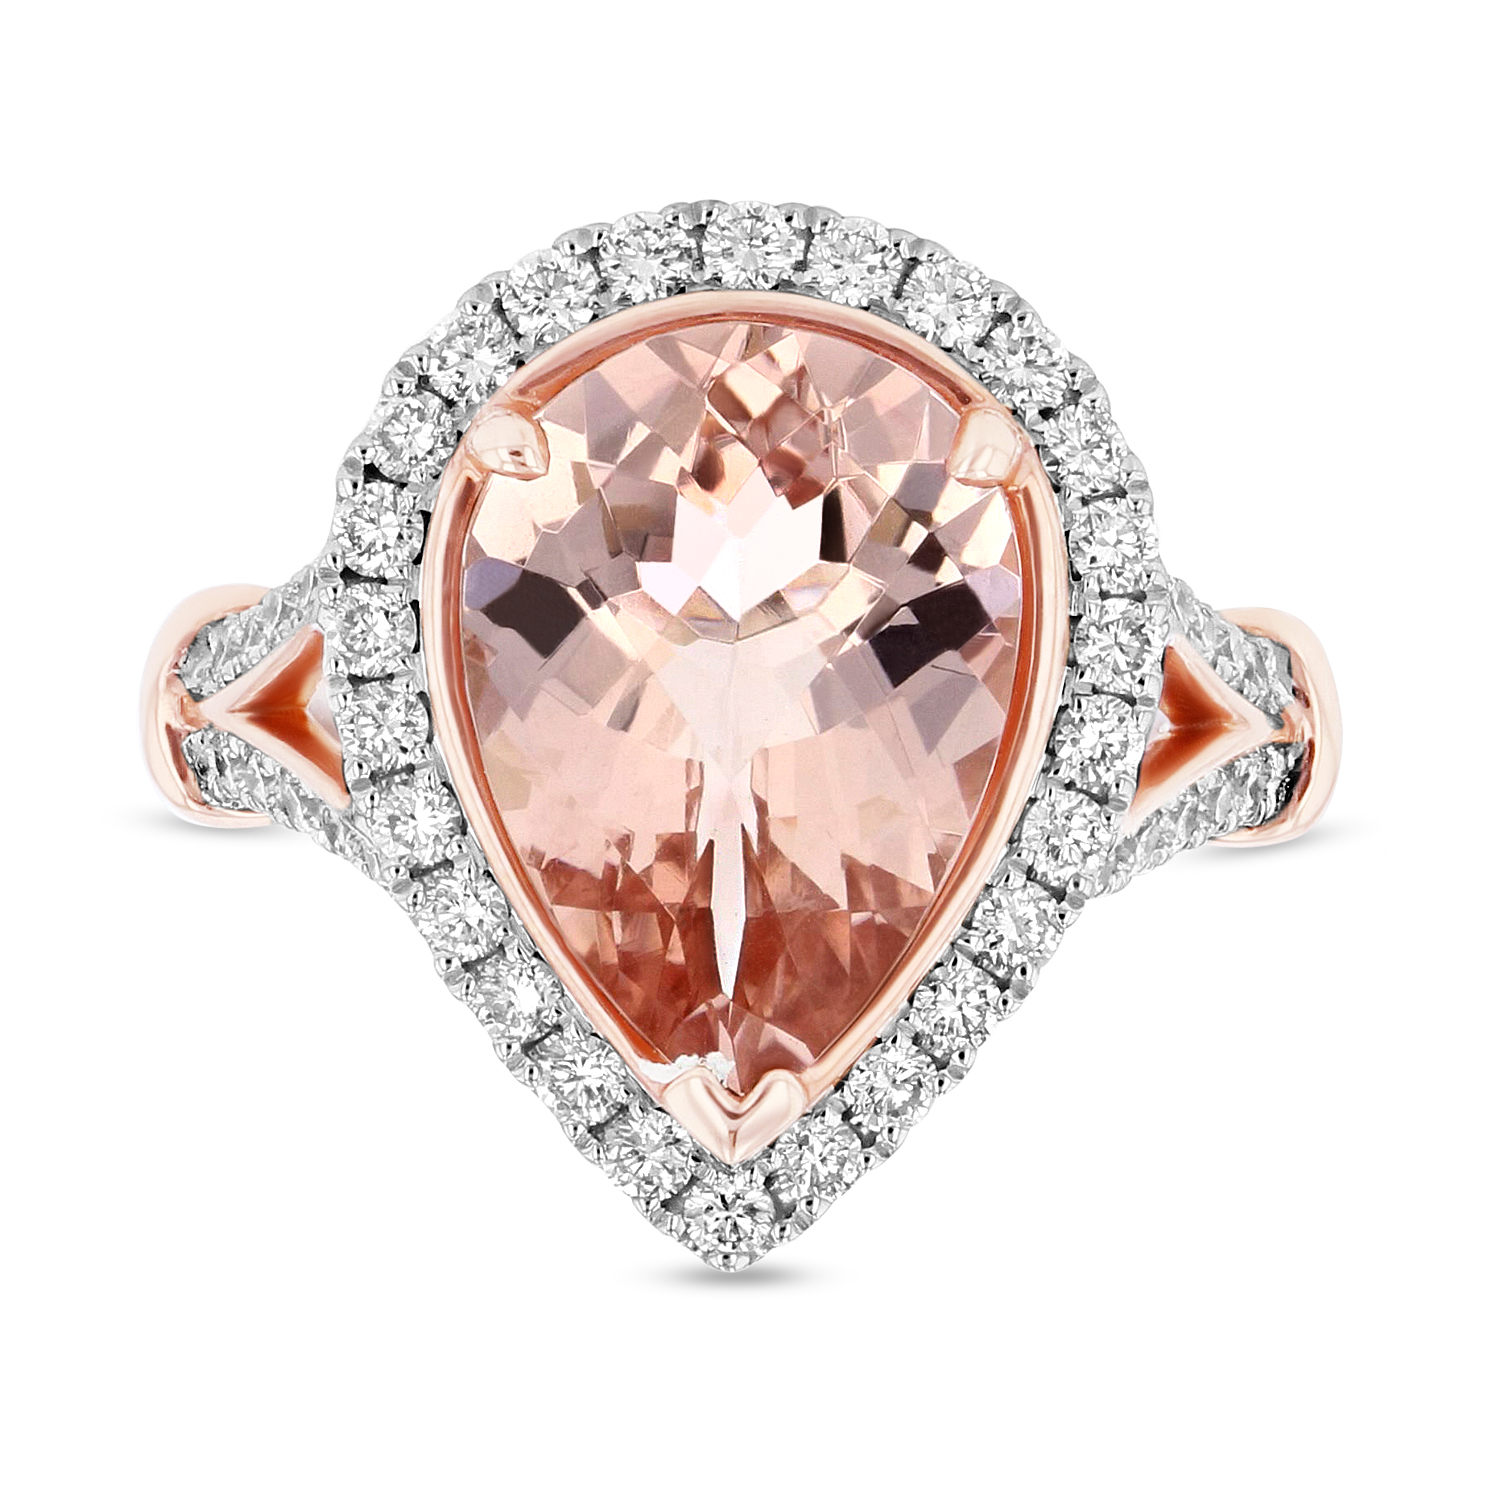 View Diamond and 4.2ct Pear Shaped Morganite Ring in 14k Two Tone Gold